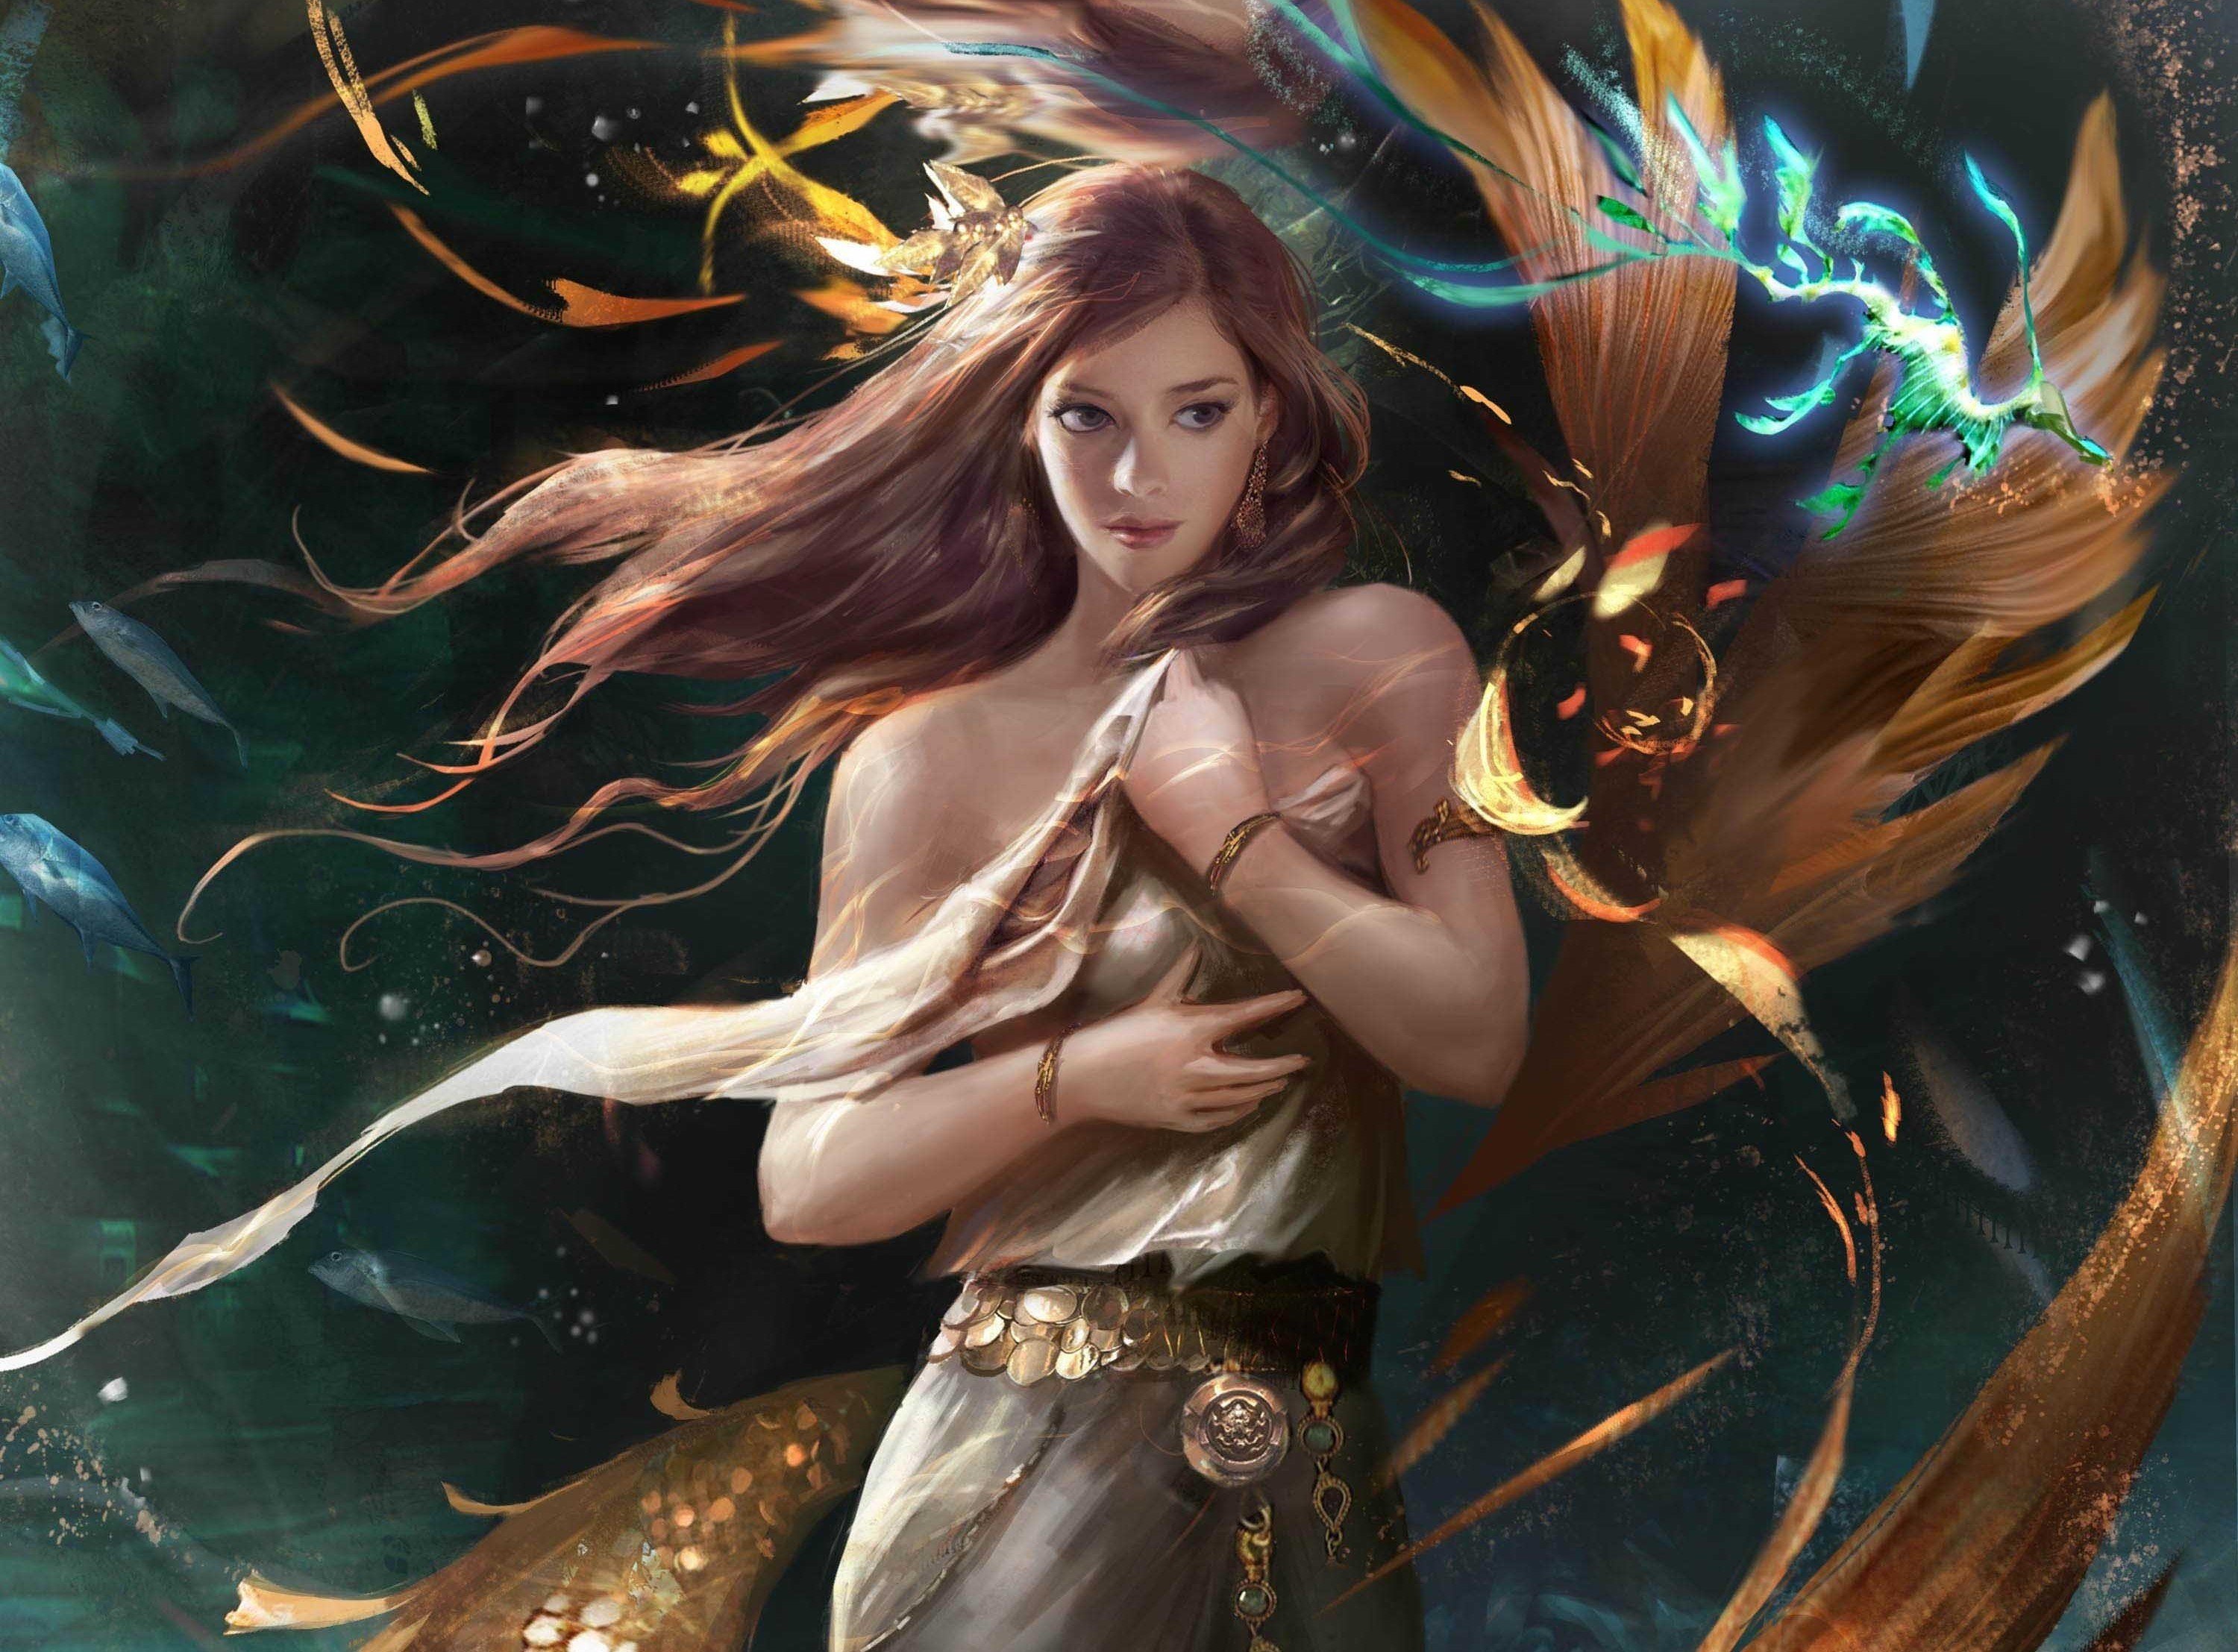 Legend Of The Cryptids Rpg Fantasy Card Fighting Wallpapers Hd